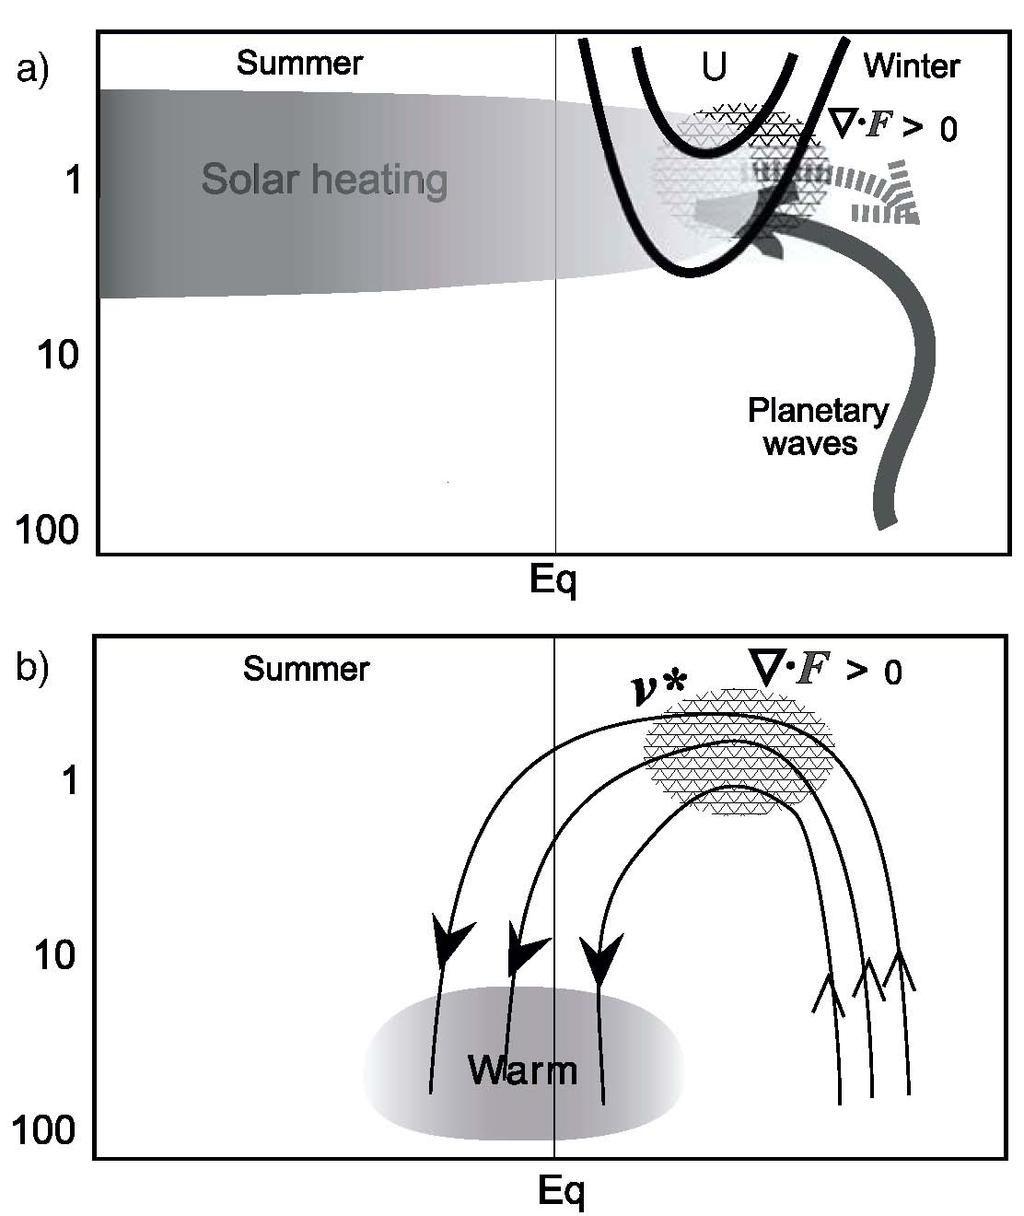 A Possible Mechanism for Explaining the Solar Cycle Variation of Ozone and Temperature in the Tropical Lower Stratosphere: Solar ultraviolet forcing effectively reduces the tropical upwelling rate